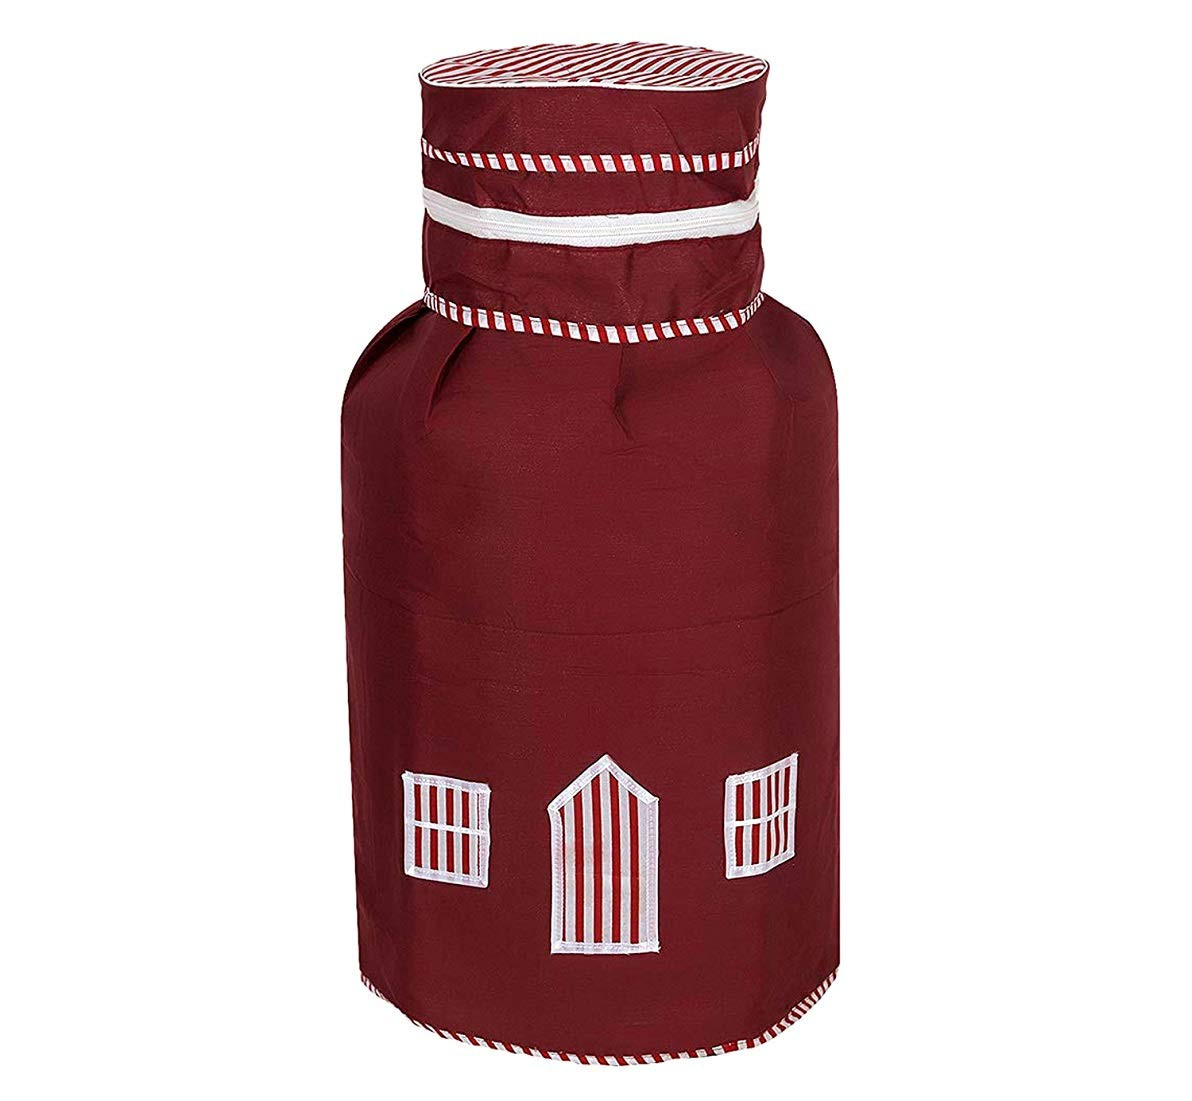 Kuber Industries 2 Pieces Cotton Dust -Water Proof LPG Gas Cylinder Cover (Maroon) - CTKTC040746